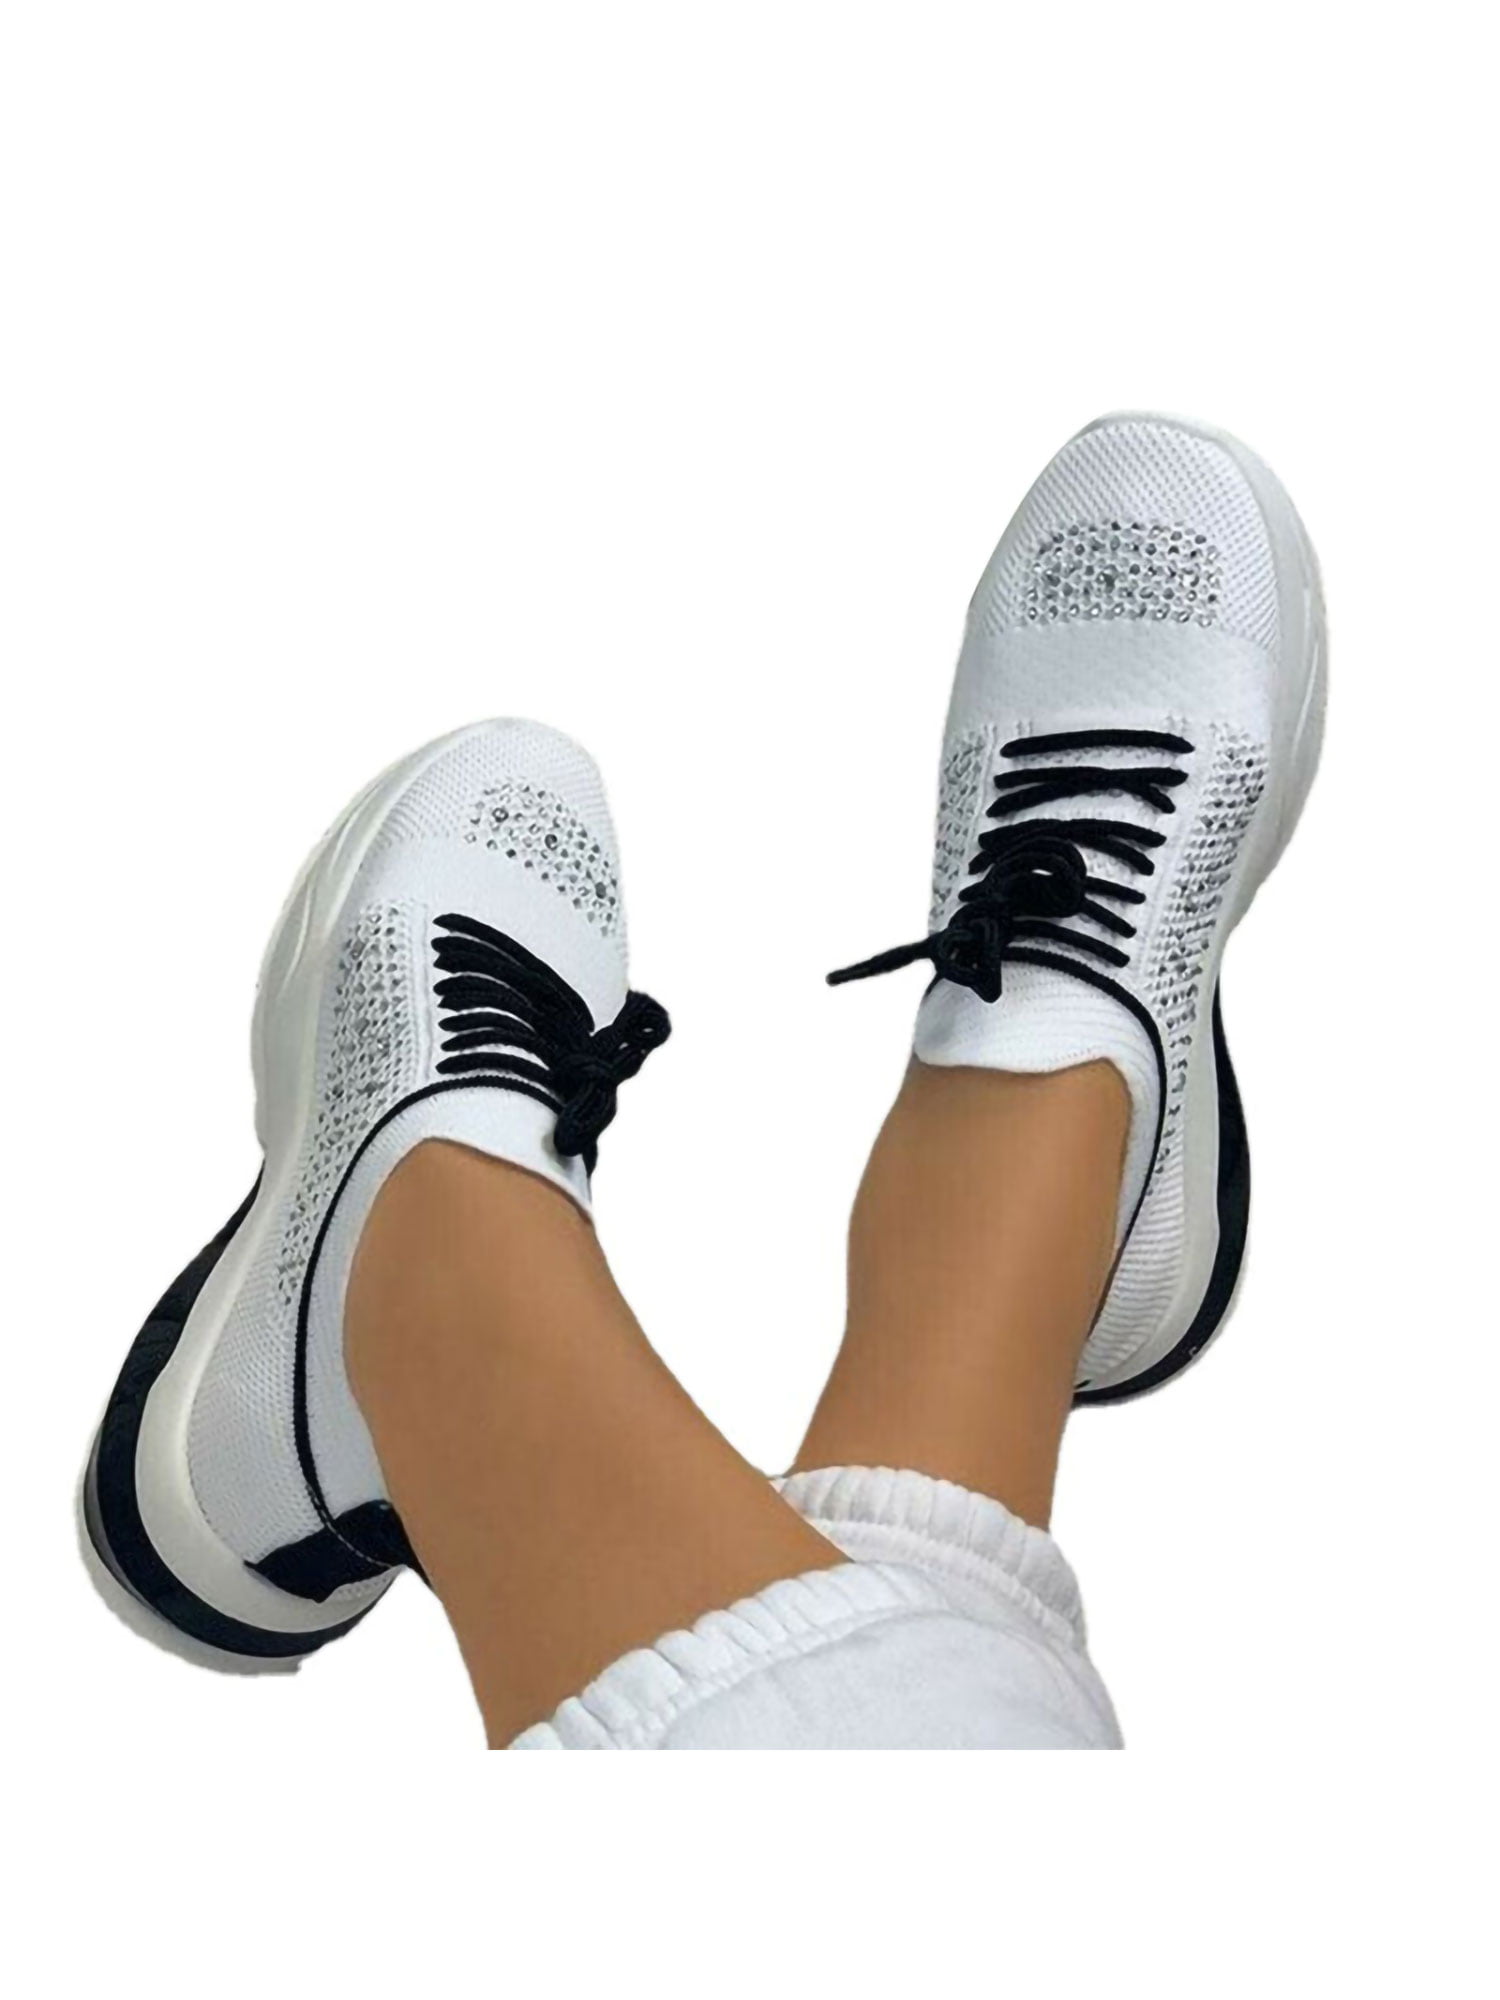 Women Running Trainers Lace Up Sneakers Sports Rhinestone Sock Comfy Shoes Size